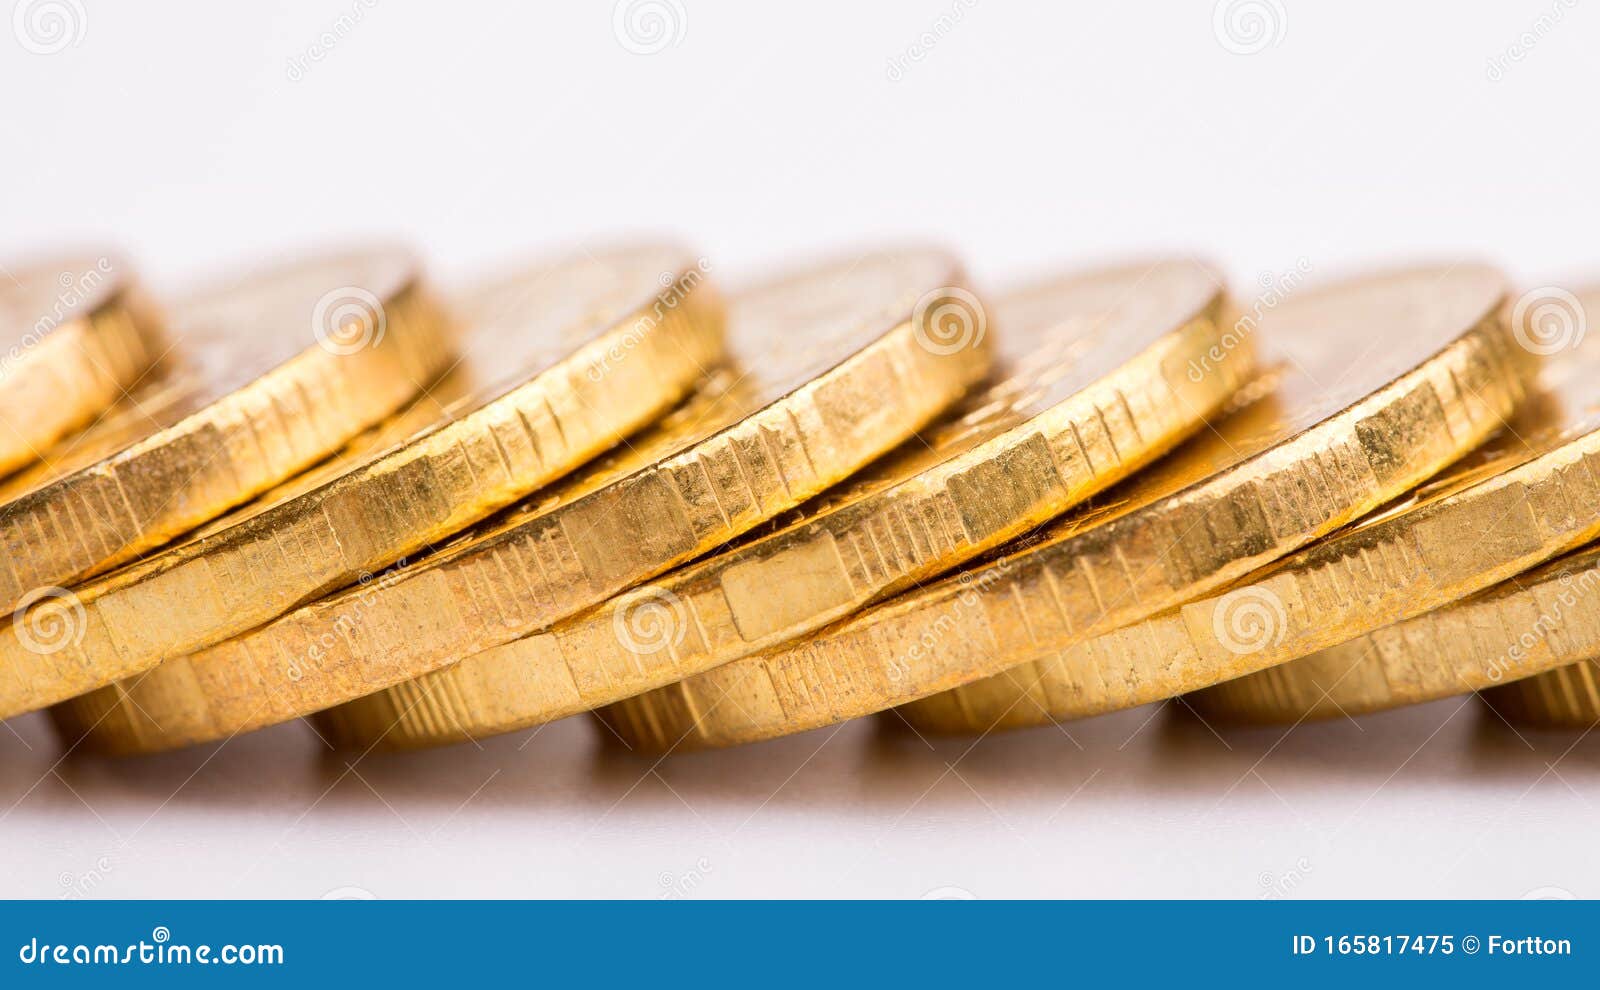 27036 Gold Loan Stock Photos, Images & Pictures